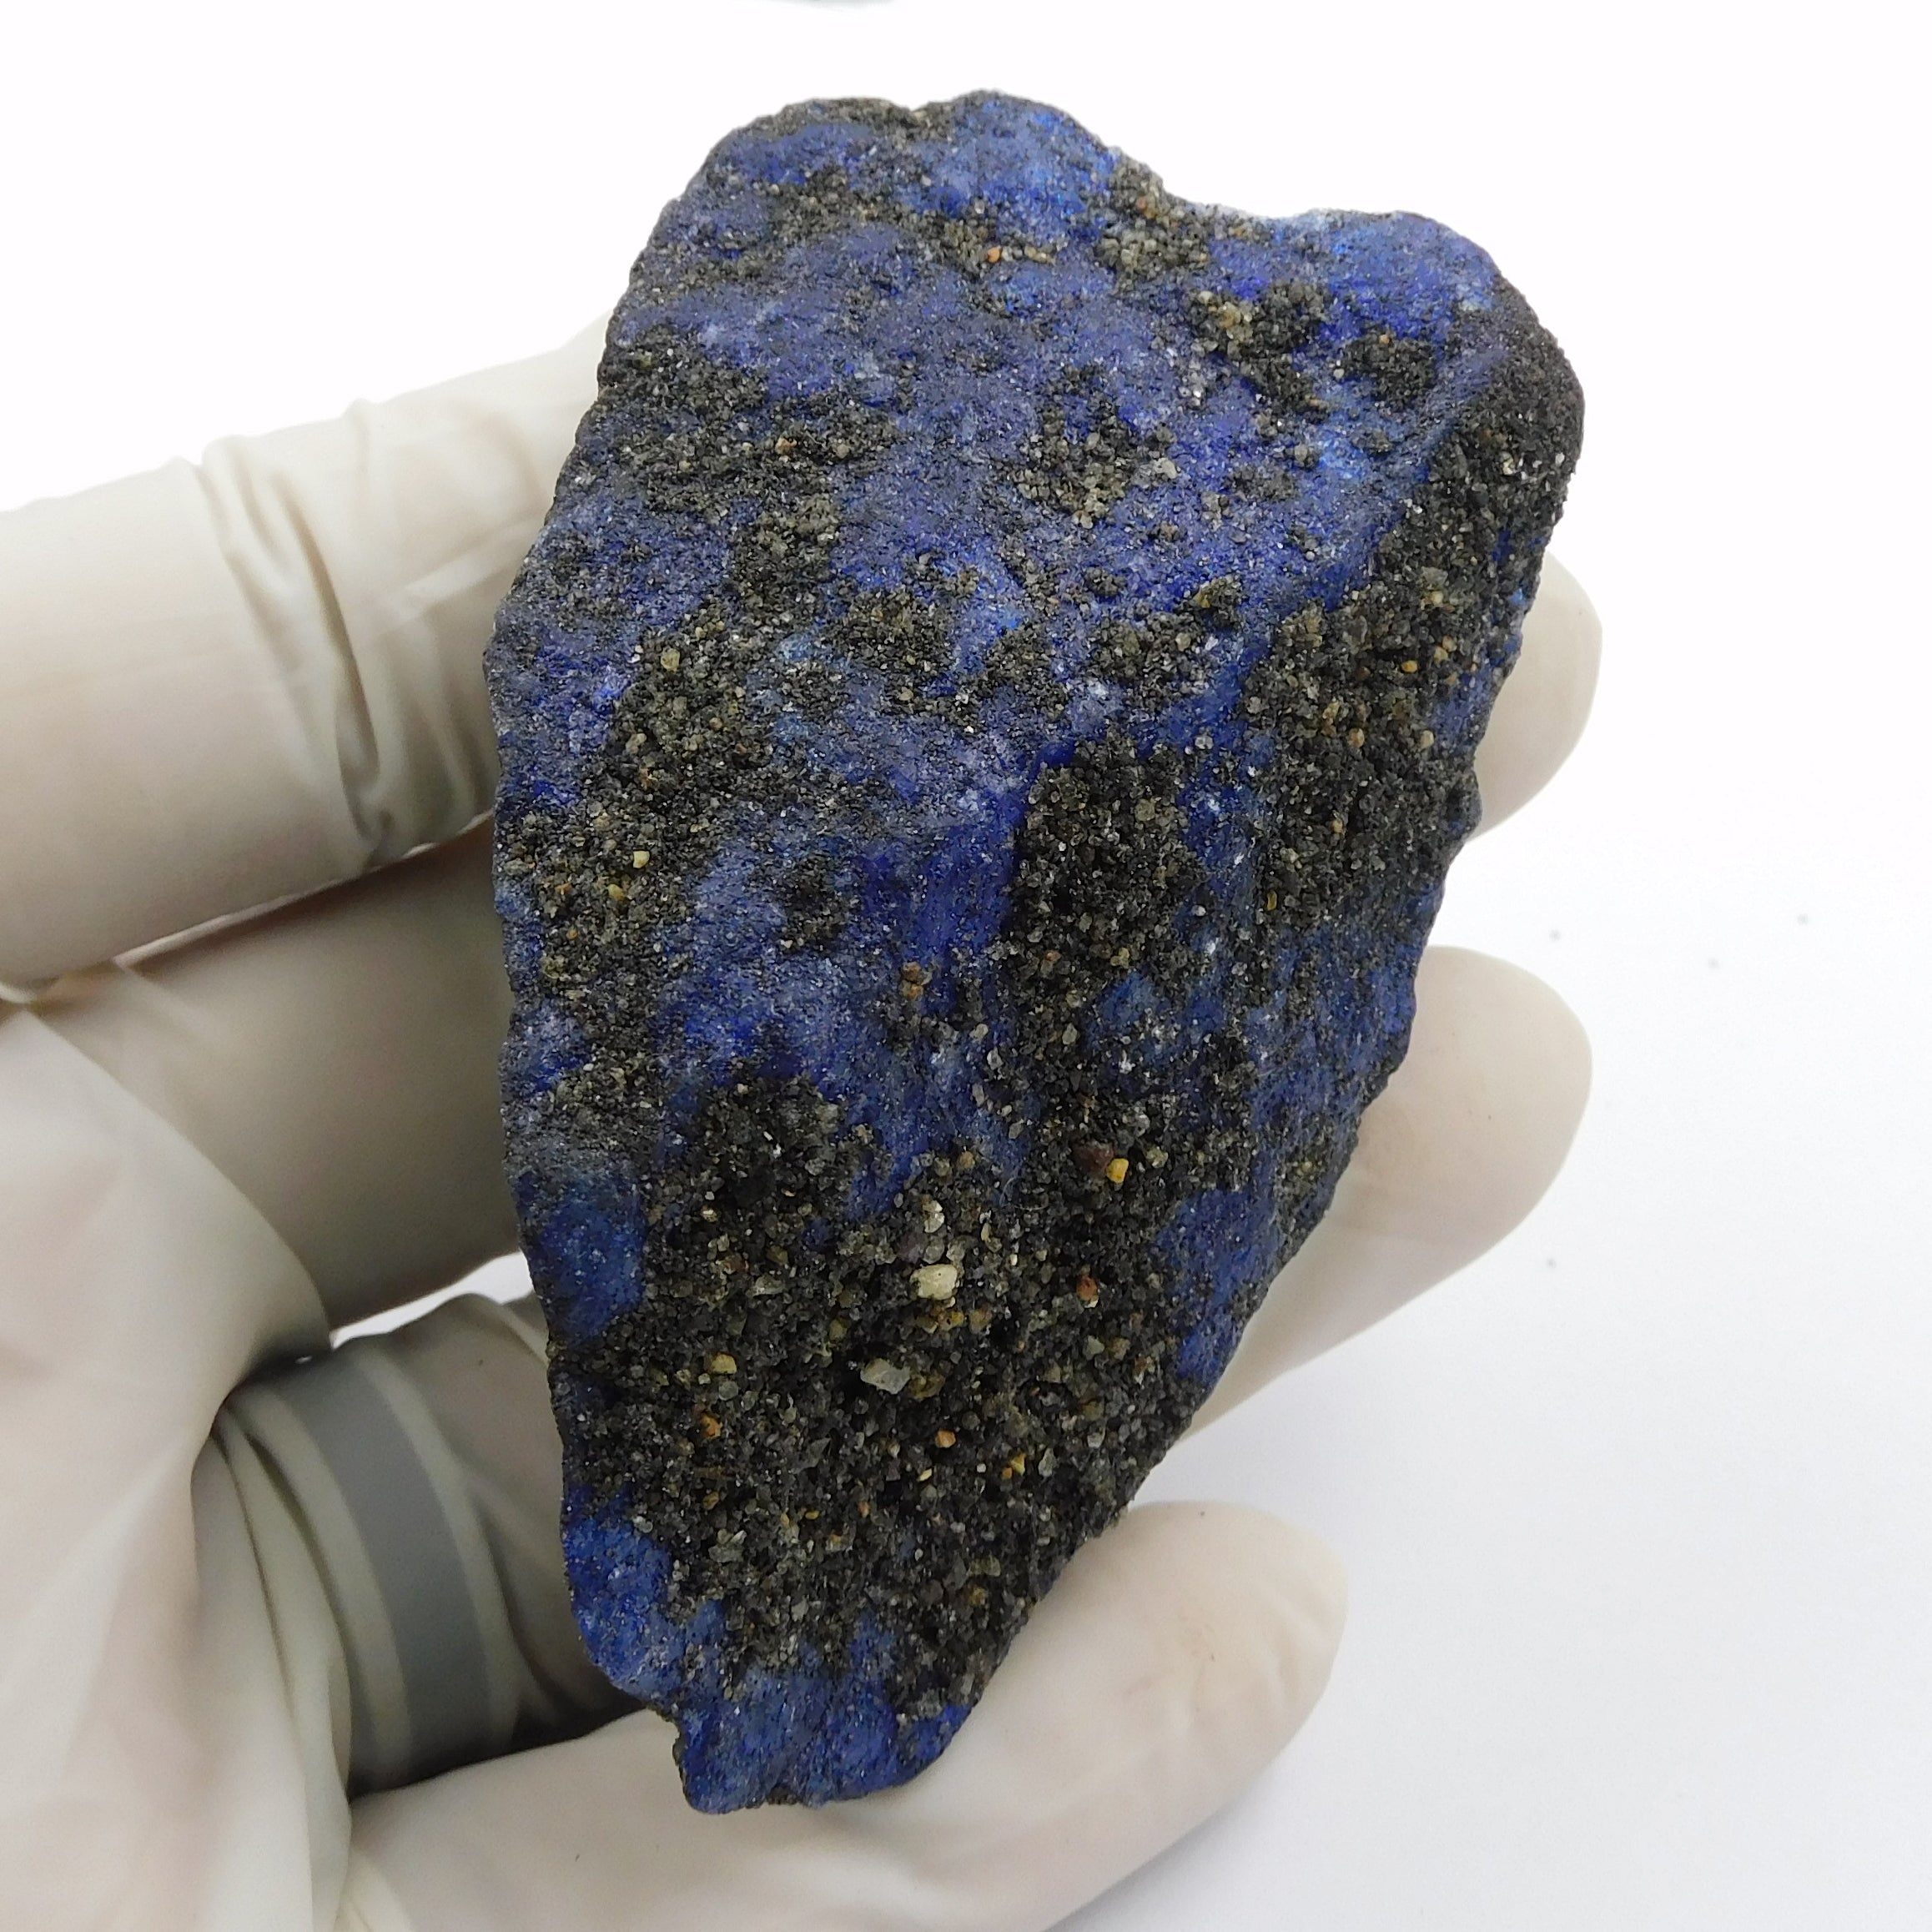 Uncut Raw Rough !!! Gift For Her / Him !!! Blue Tanzanite Rough 452.55 Carat Blue Tanzanite Rough Certified Loose Gemstone